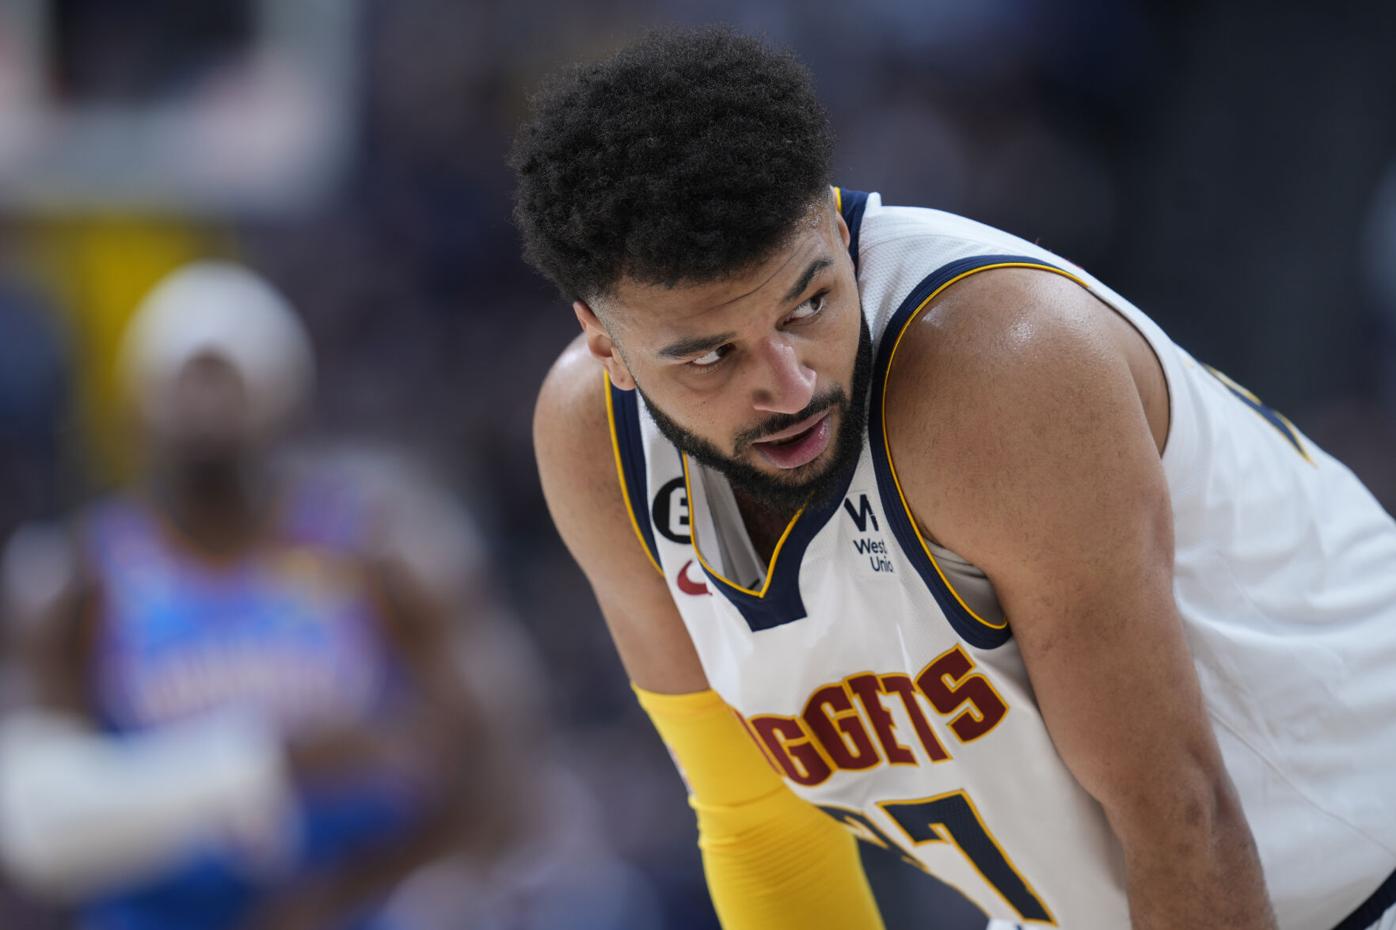 Jamal Murray's status for Game 1 of the Western Conference Finals remains uncertain